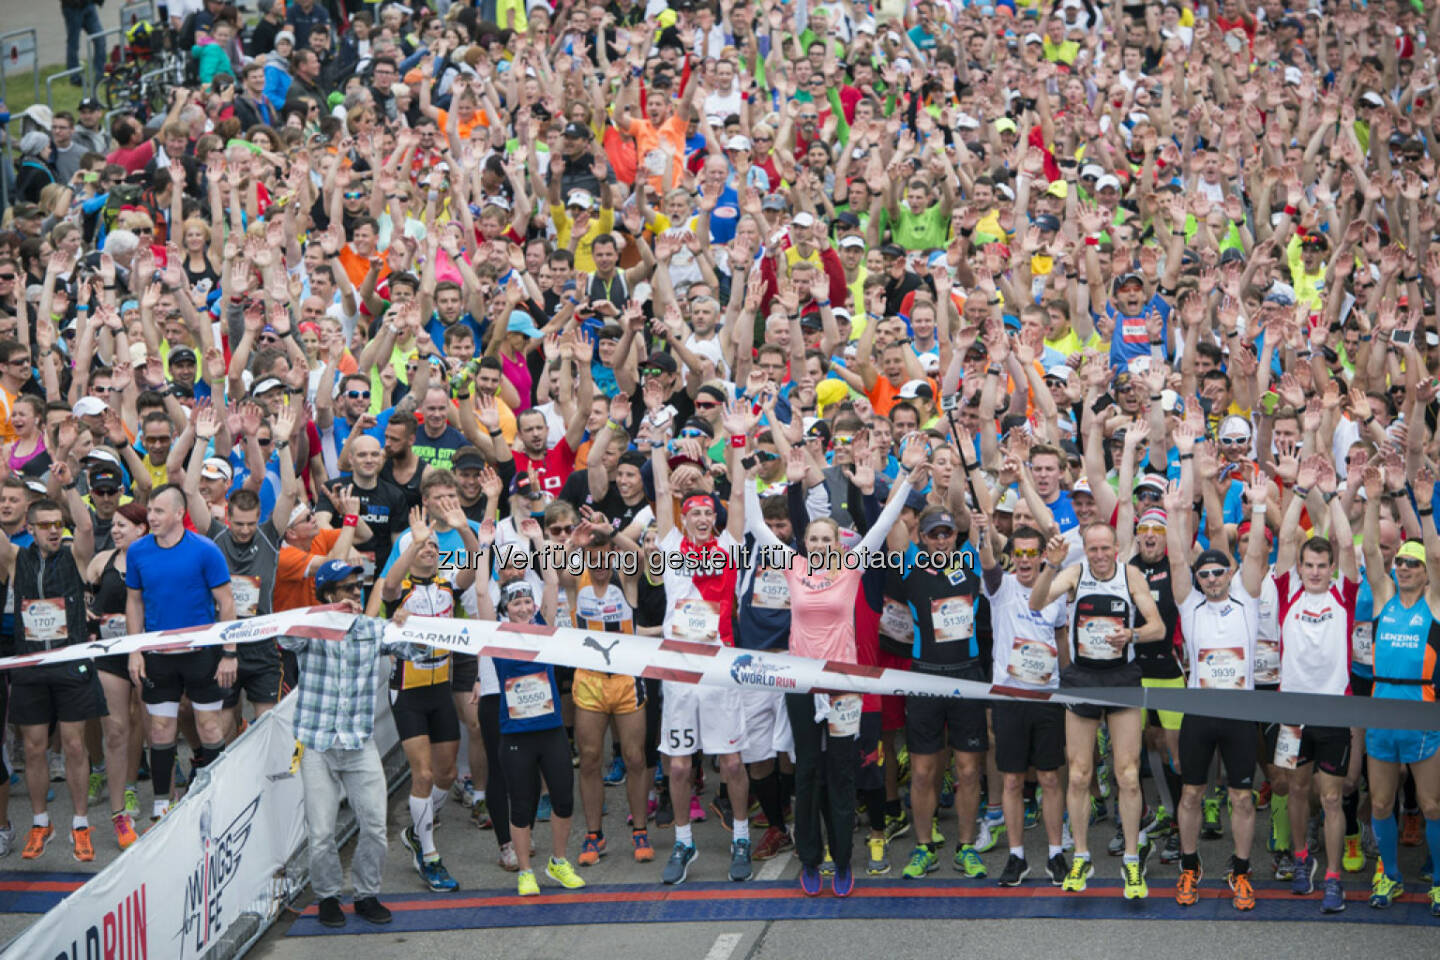 Participants celebrate during the Wings for Life World Run in lower Austria, Austria on May 3, 2015 // Philipp Schuster for Wings for Life World Run //Please go to www.redbullcontentpool.com for further information. // 